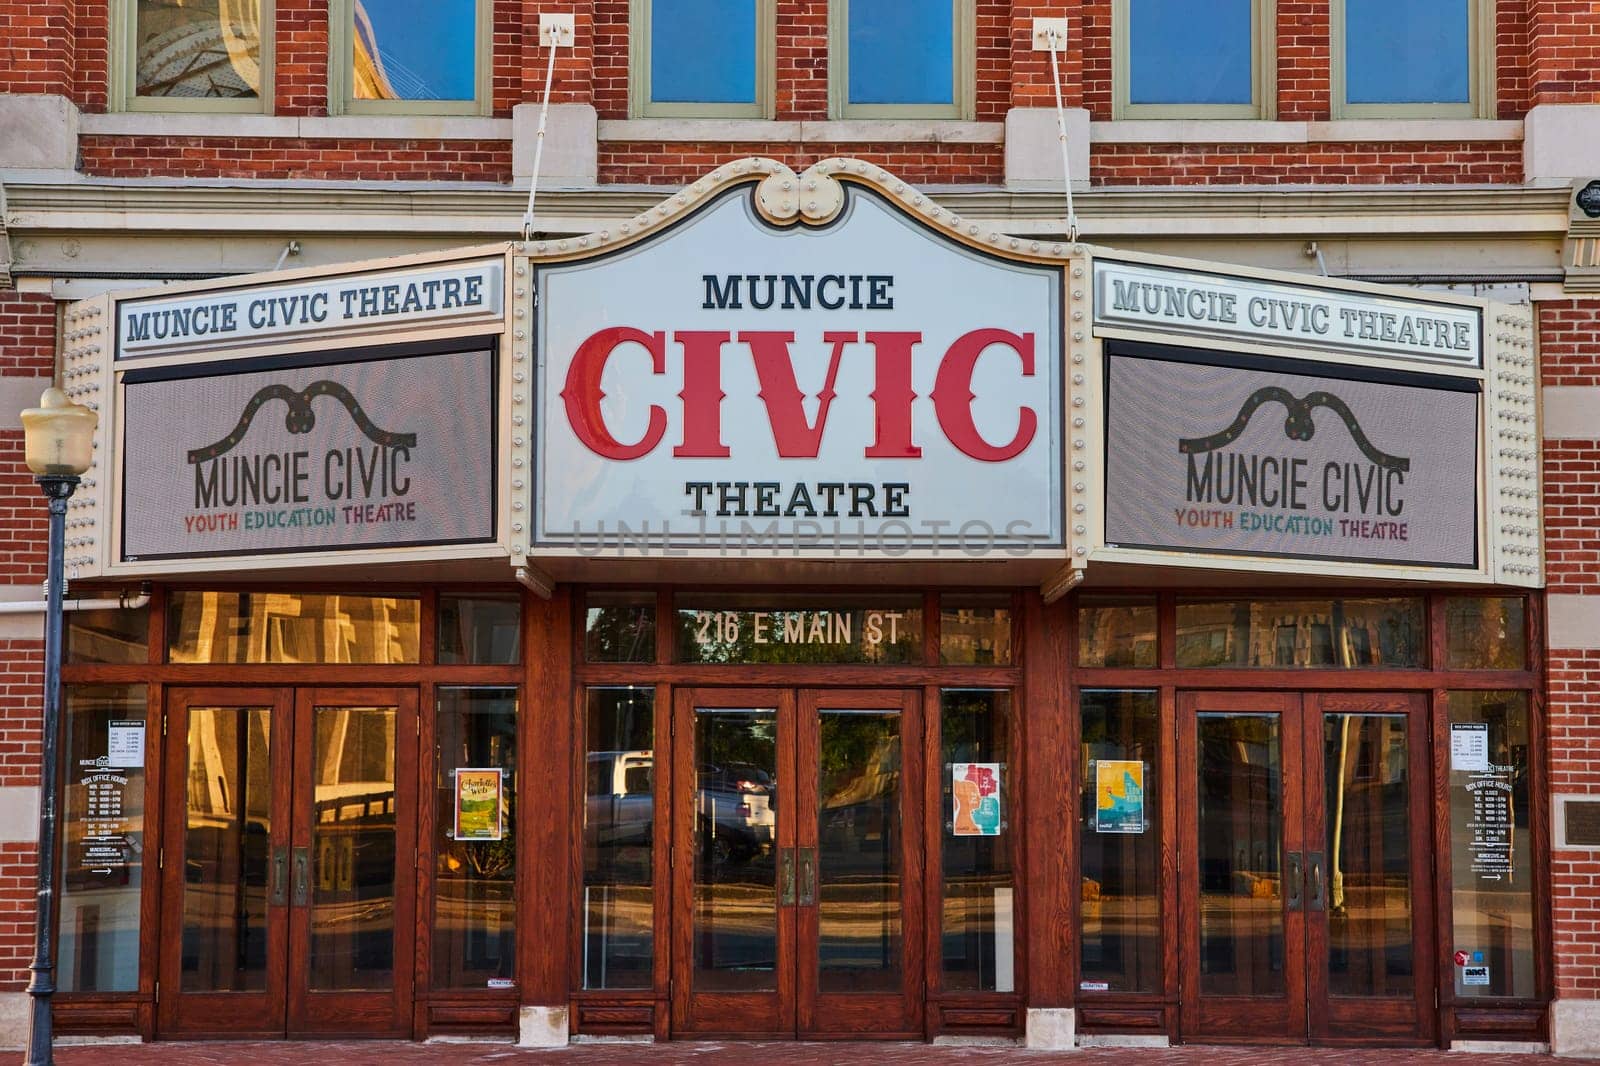 Muncie Civic Theatre Entrance with Marquee Signs, Indiana by njproductions